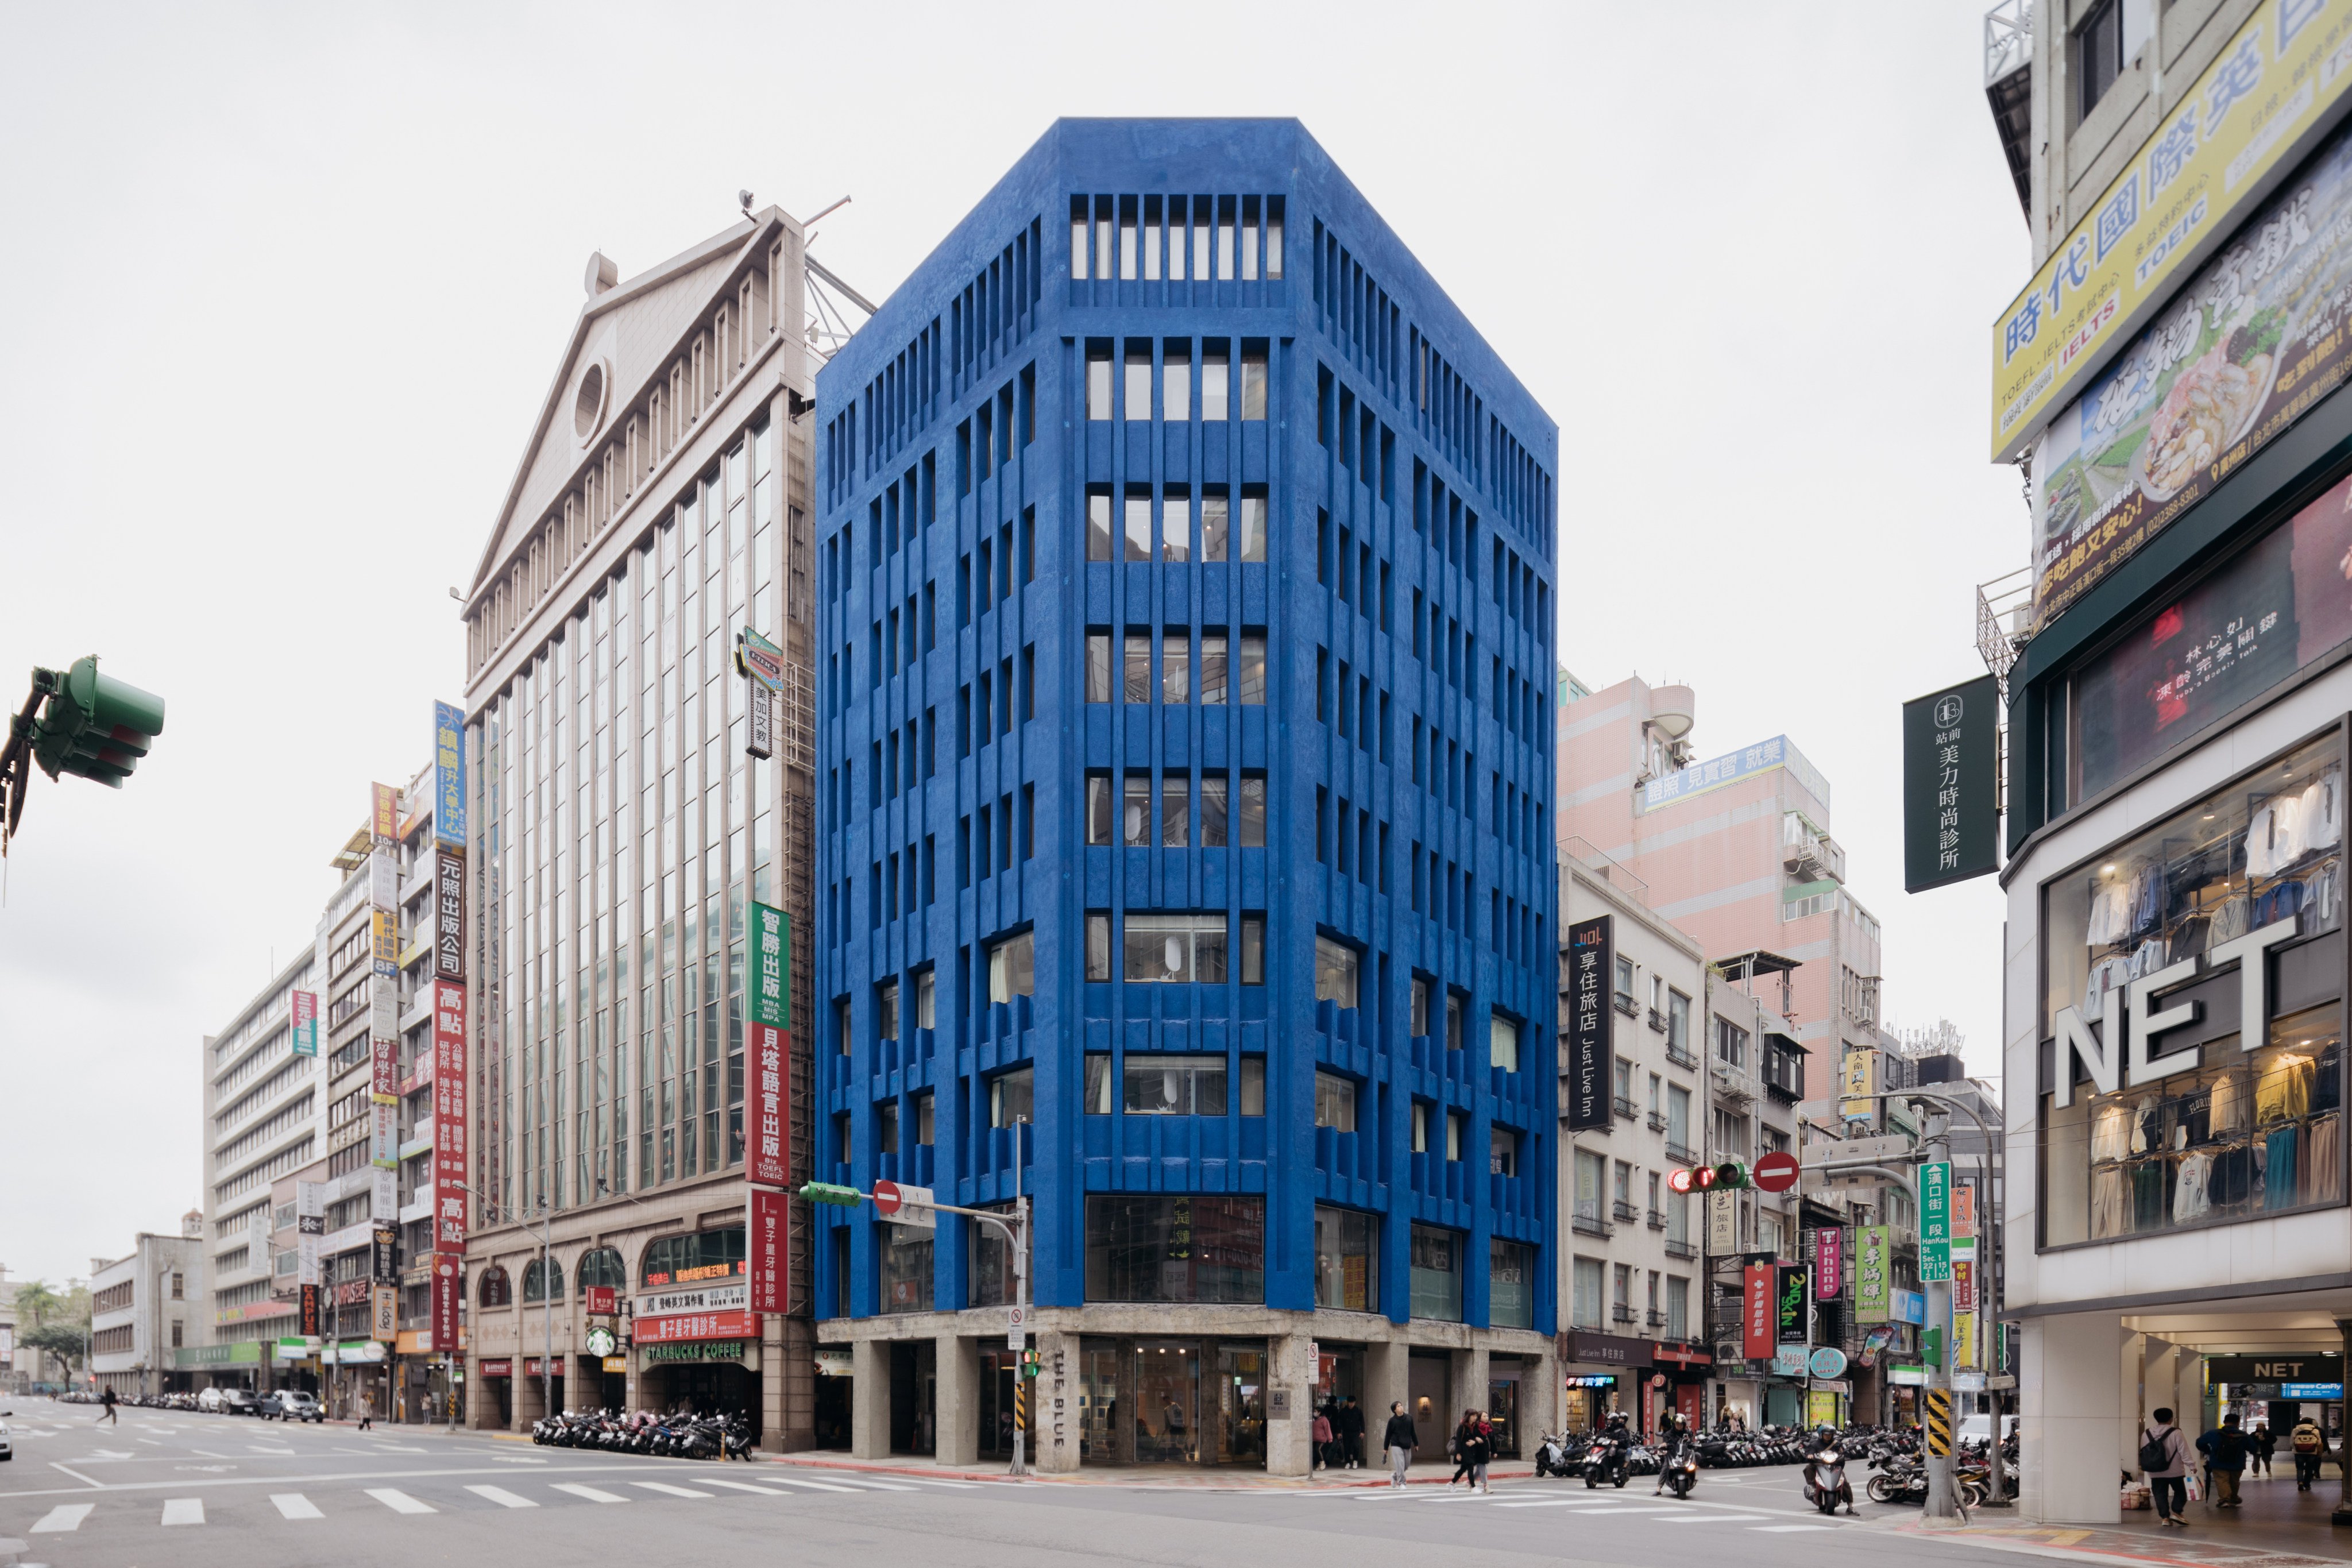 The Blue, in Taipei, by Spheron Architects. Its designers talk about conceiving the hotel according to Emotionalist principles they set out in a manifesto that calls for architecture to counter an “ever-digitising world” where they fear humans are losing control. Photo: Yu Zhi Lin